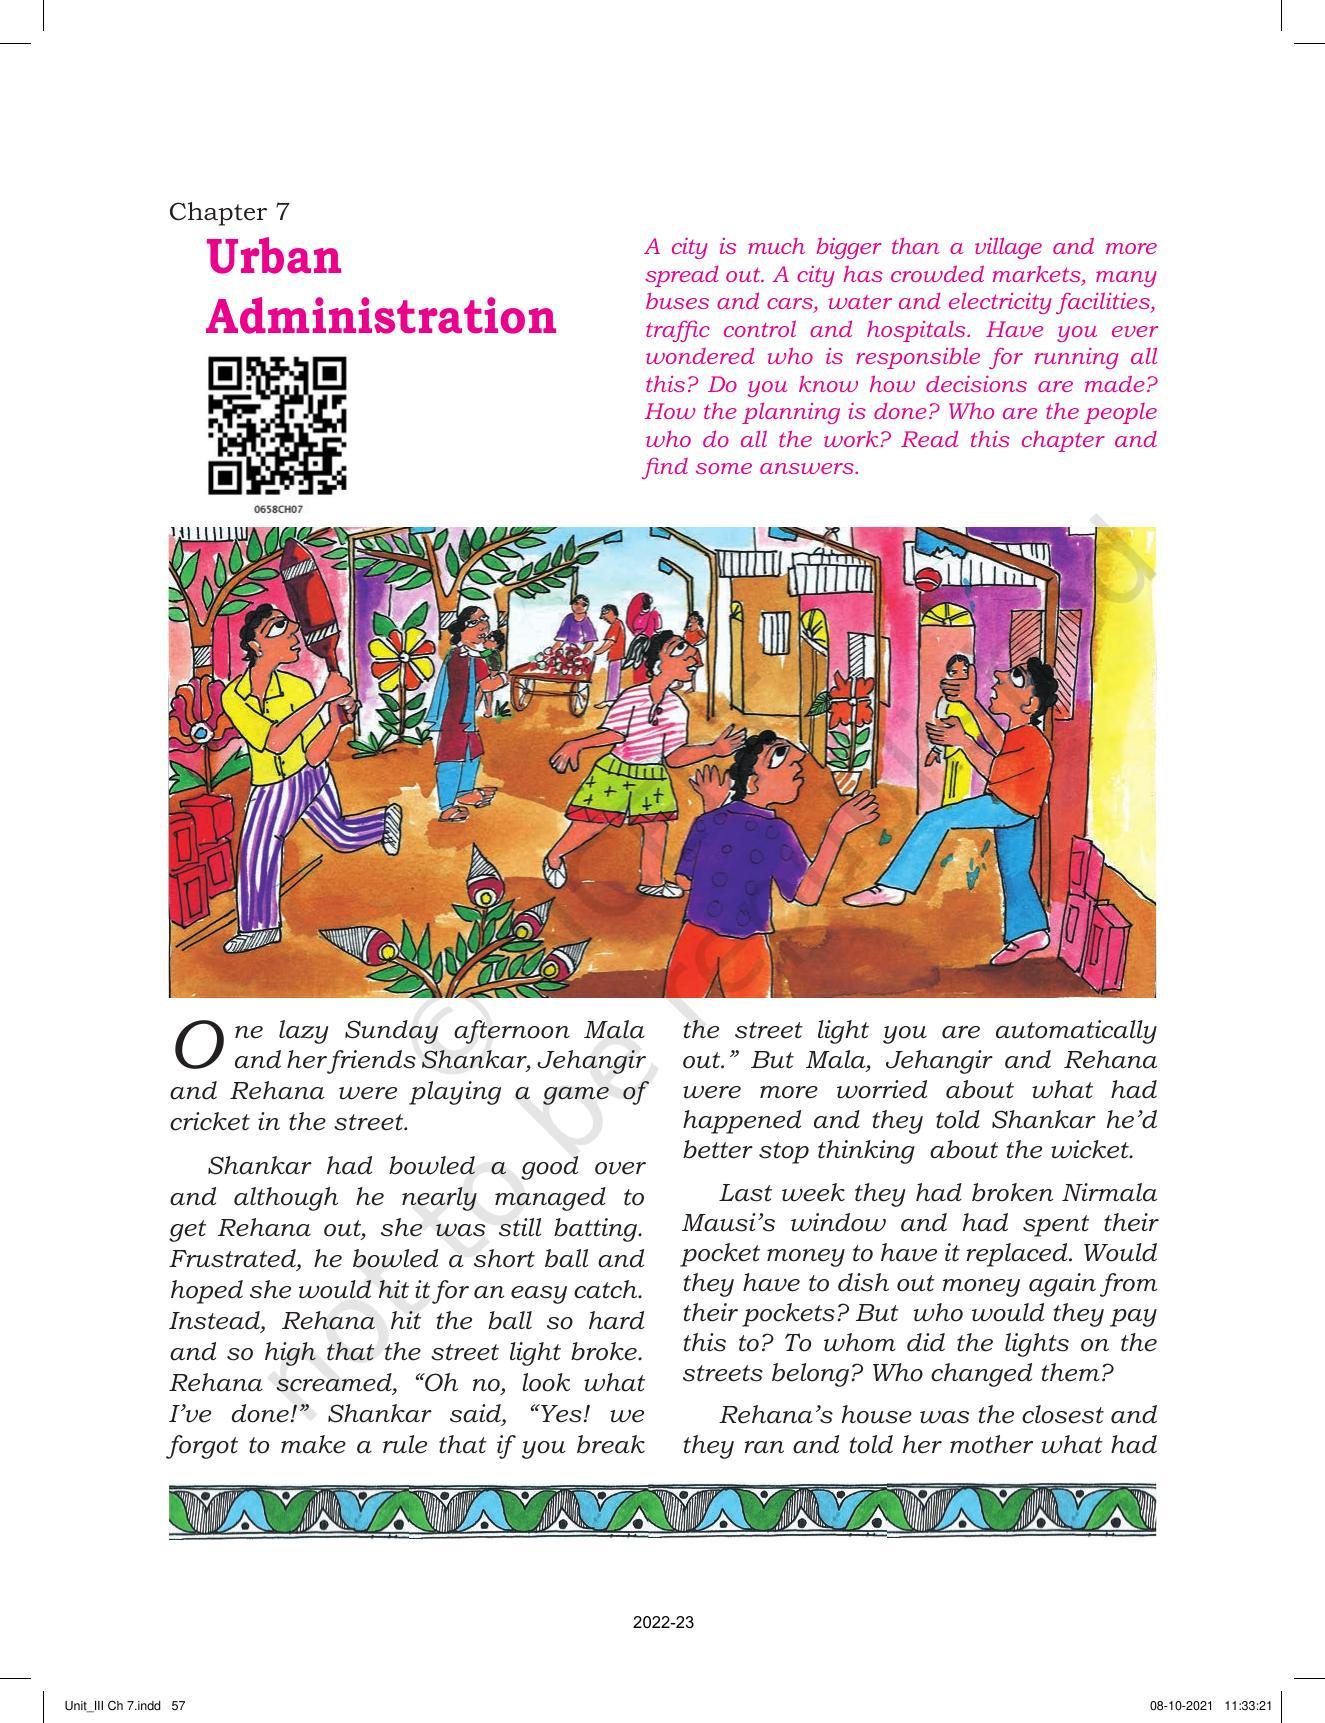 NCERT Book for Class 6 Social Science(Political Science) : Chapter 7-Urban Administration - Page 1